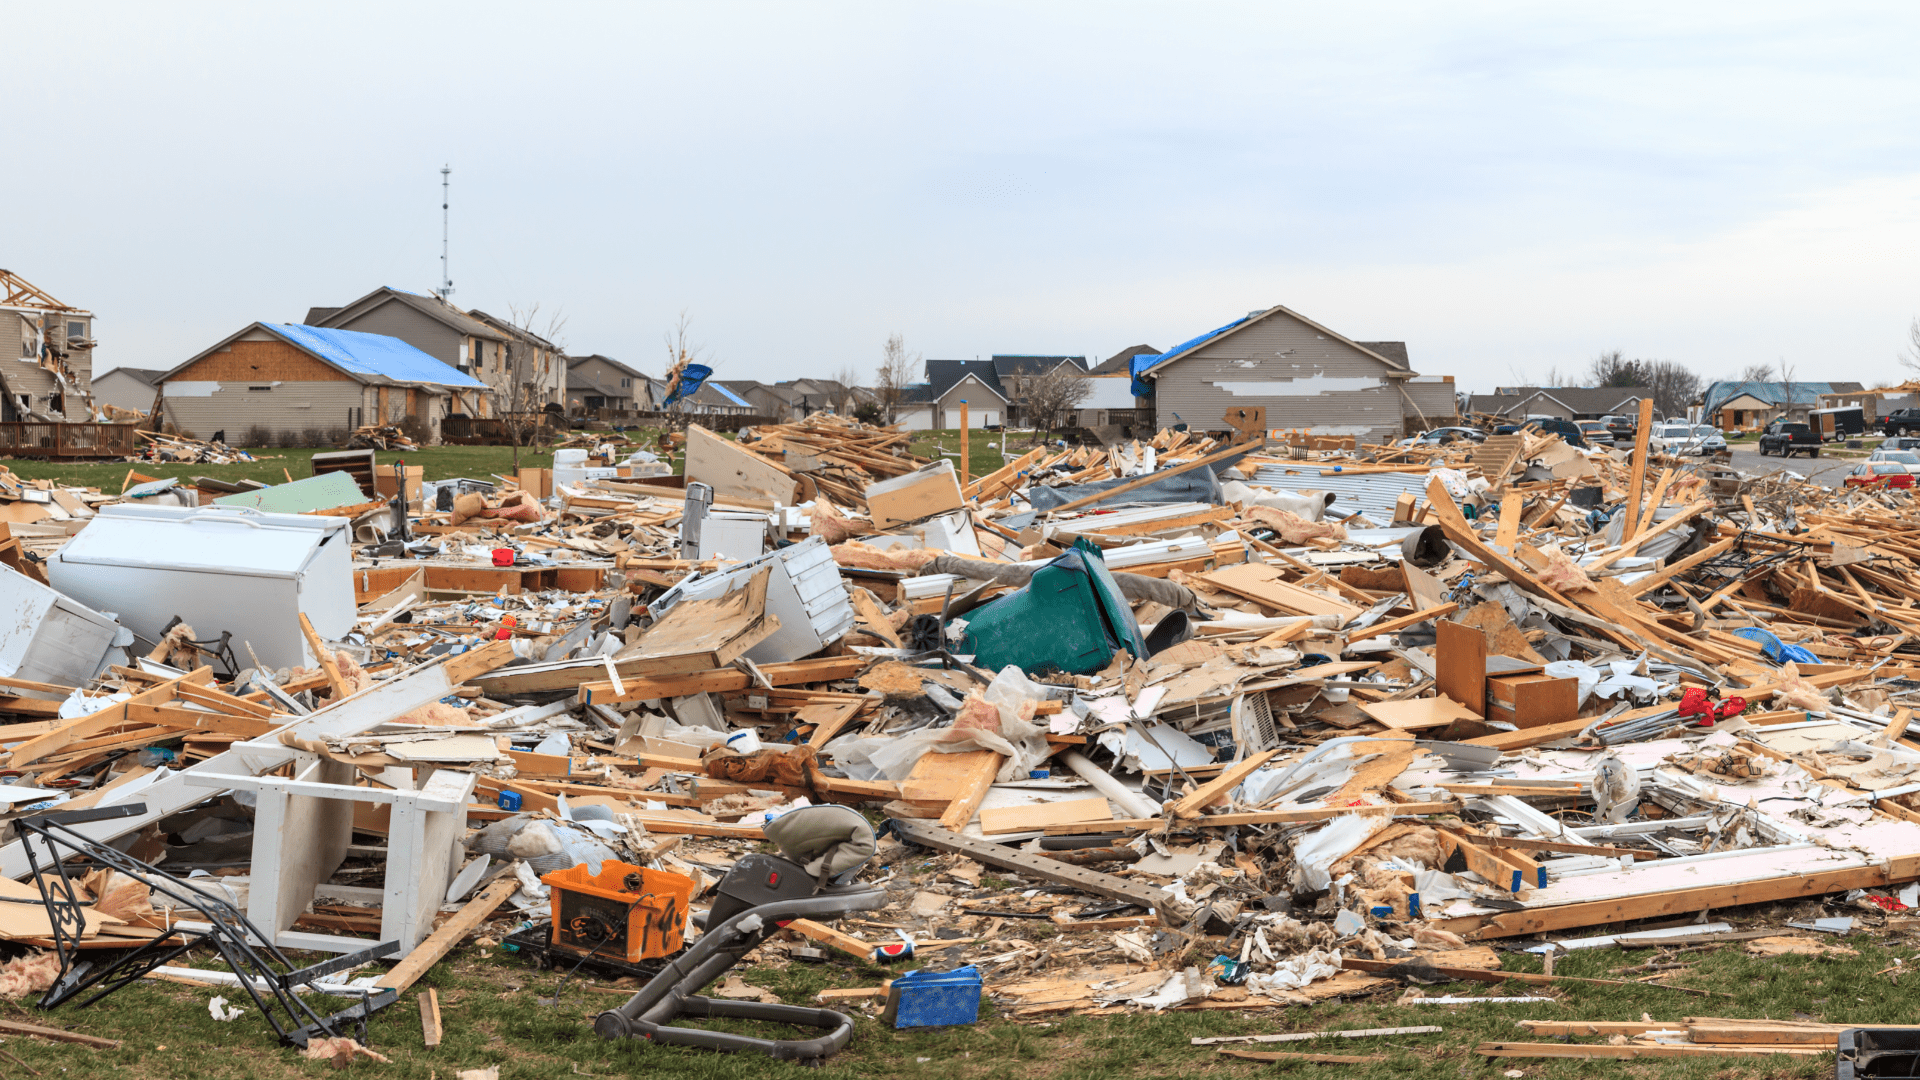 Aftermath of Tornado Damage with Collapsed Houses and Debris